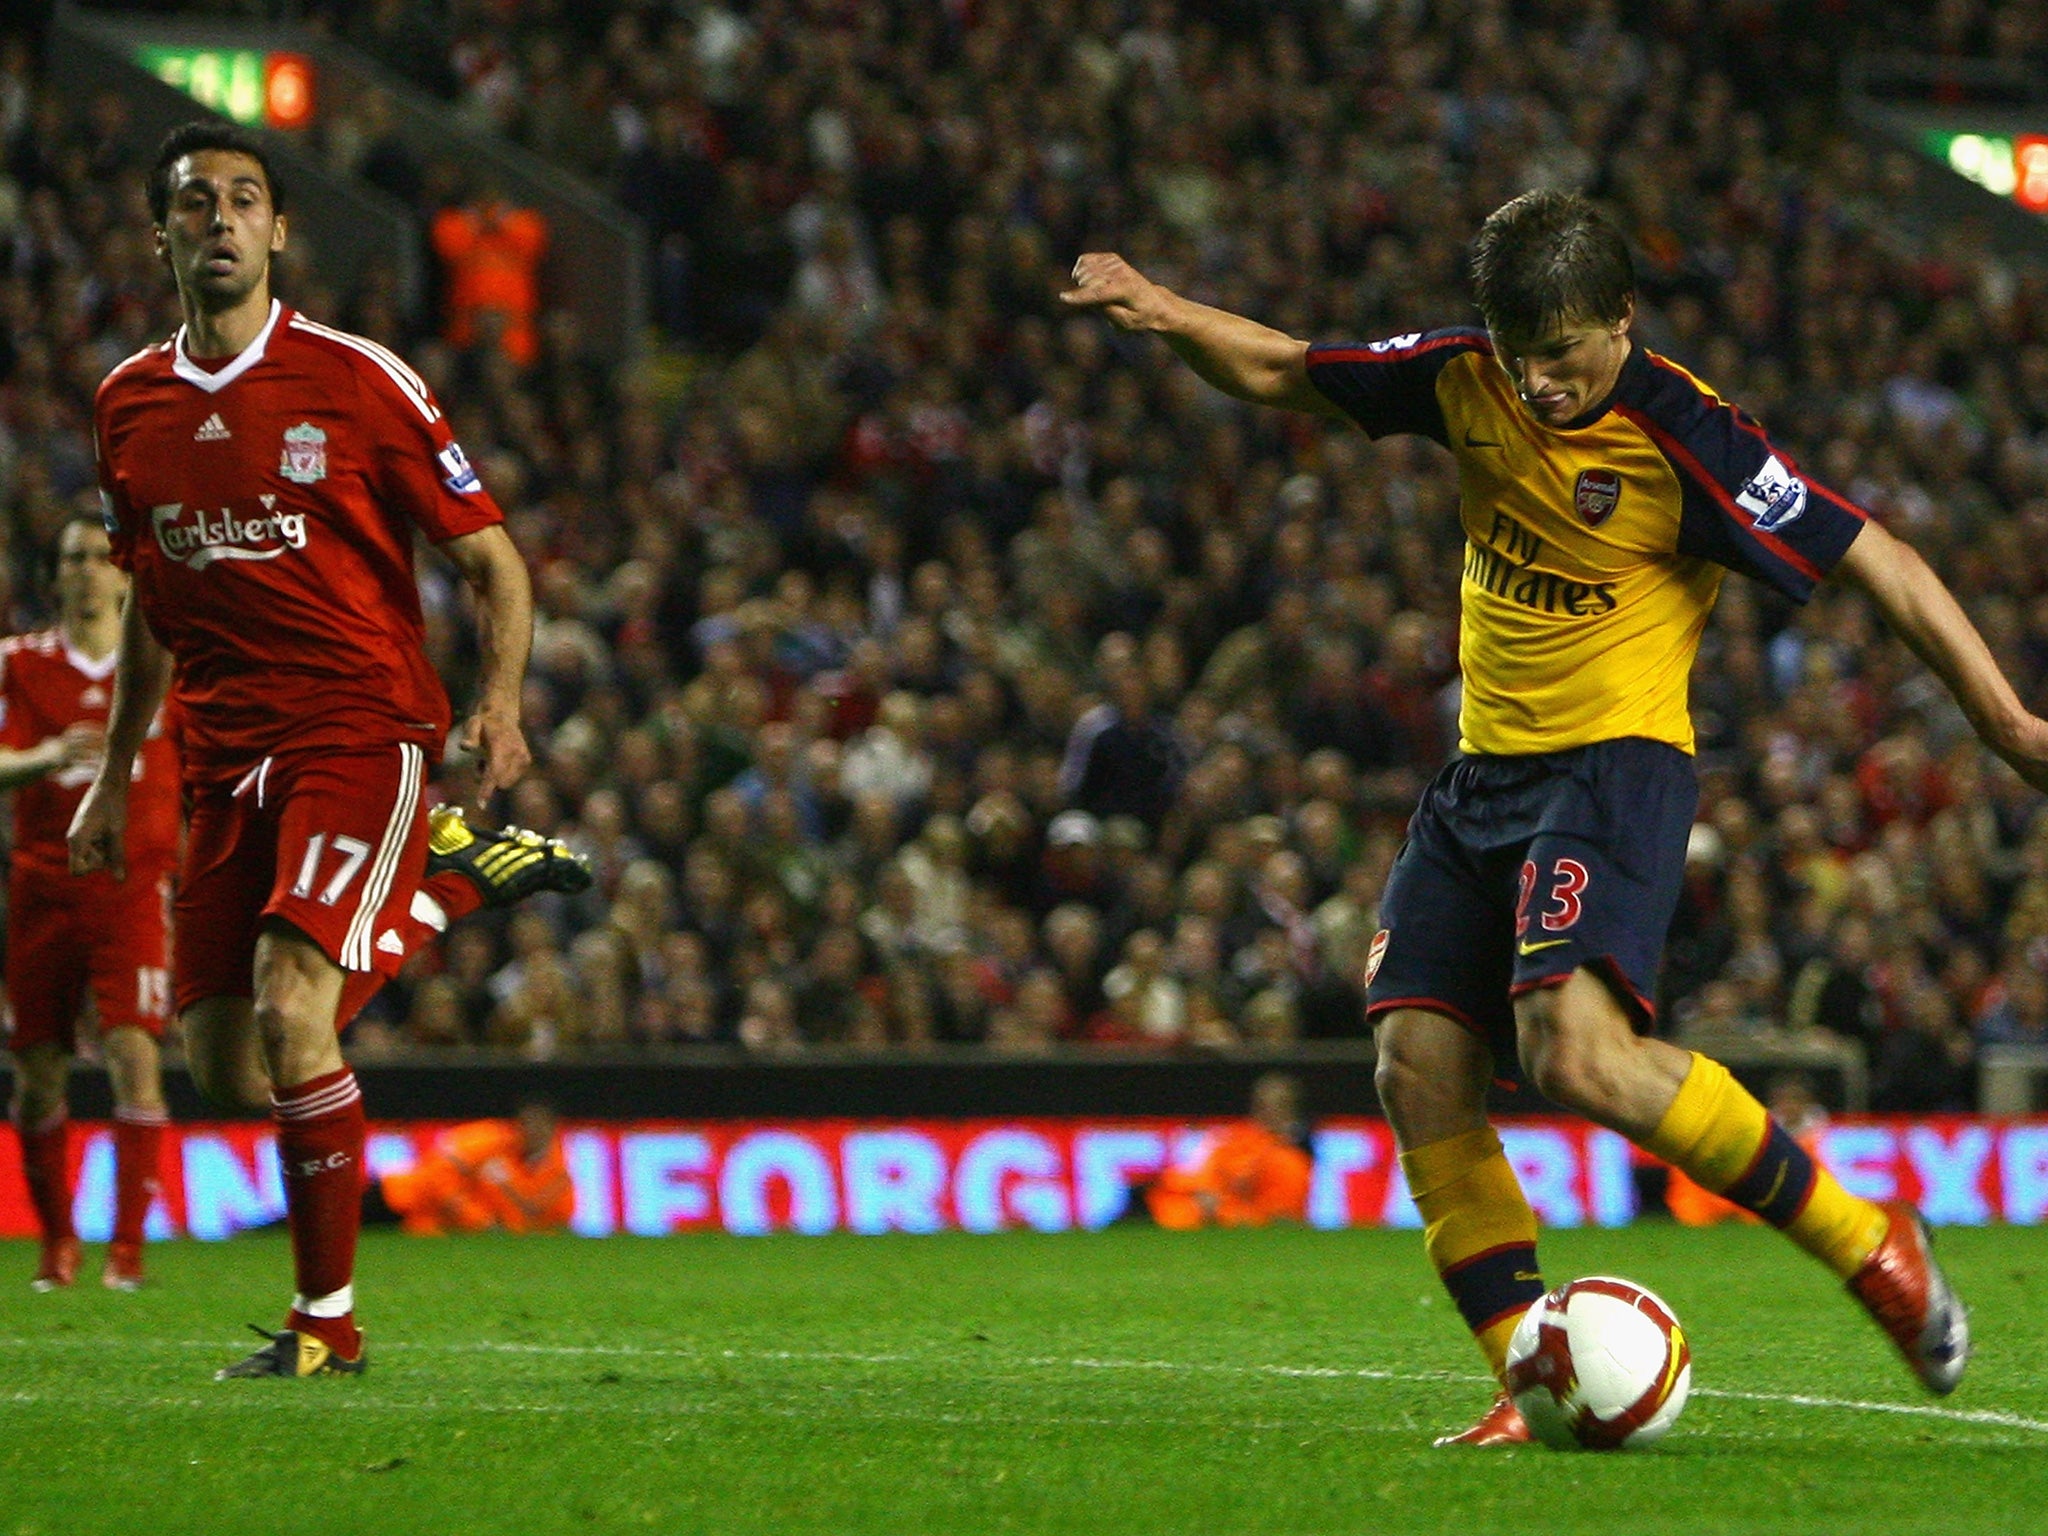 &#13;
The highlight of Arshavin's Arsenal career came when he hit four past Liverpool at Anfield &#13;